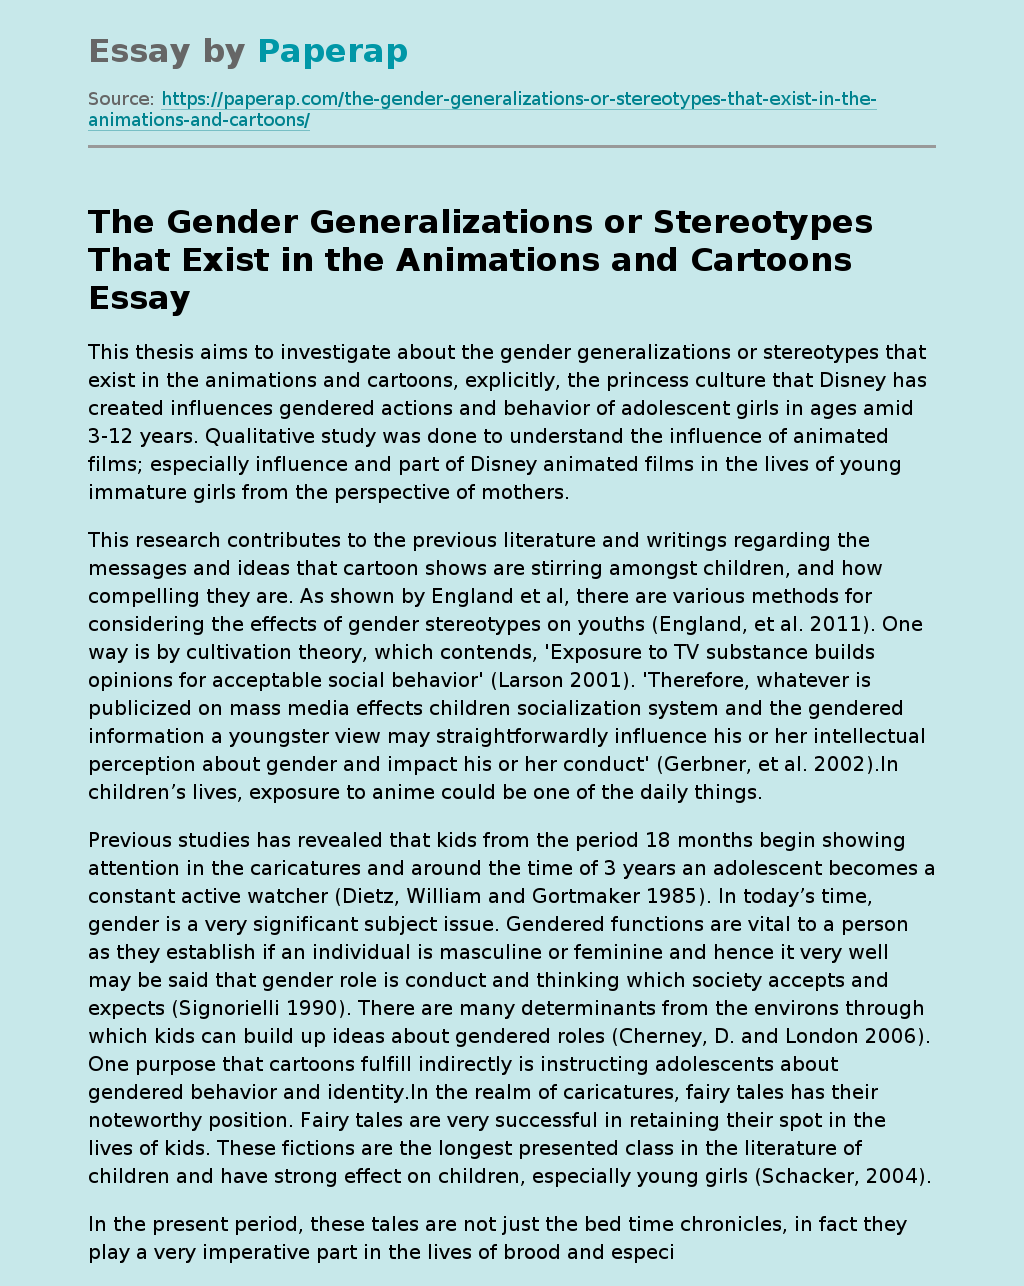 The Gender Generalizations or Stereotypes That Exist in the Animations and Cartoons